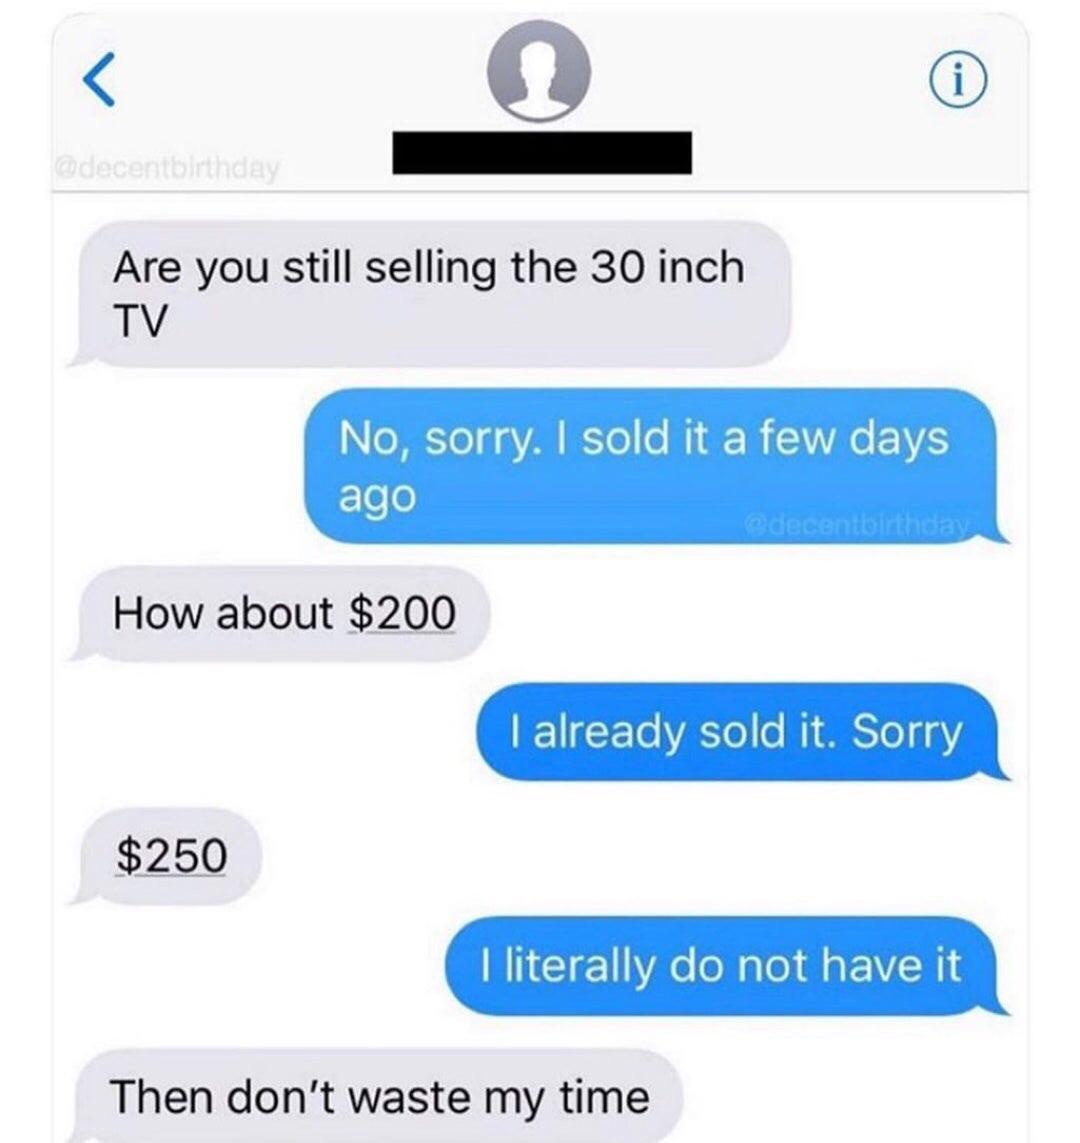 Are you still selling the 30 inch Tv No, sorry. I sold it a few days ago How about $200 I already sold it. Sorry $250 I literally do not have it Then don't waste my time